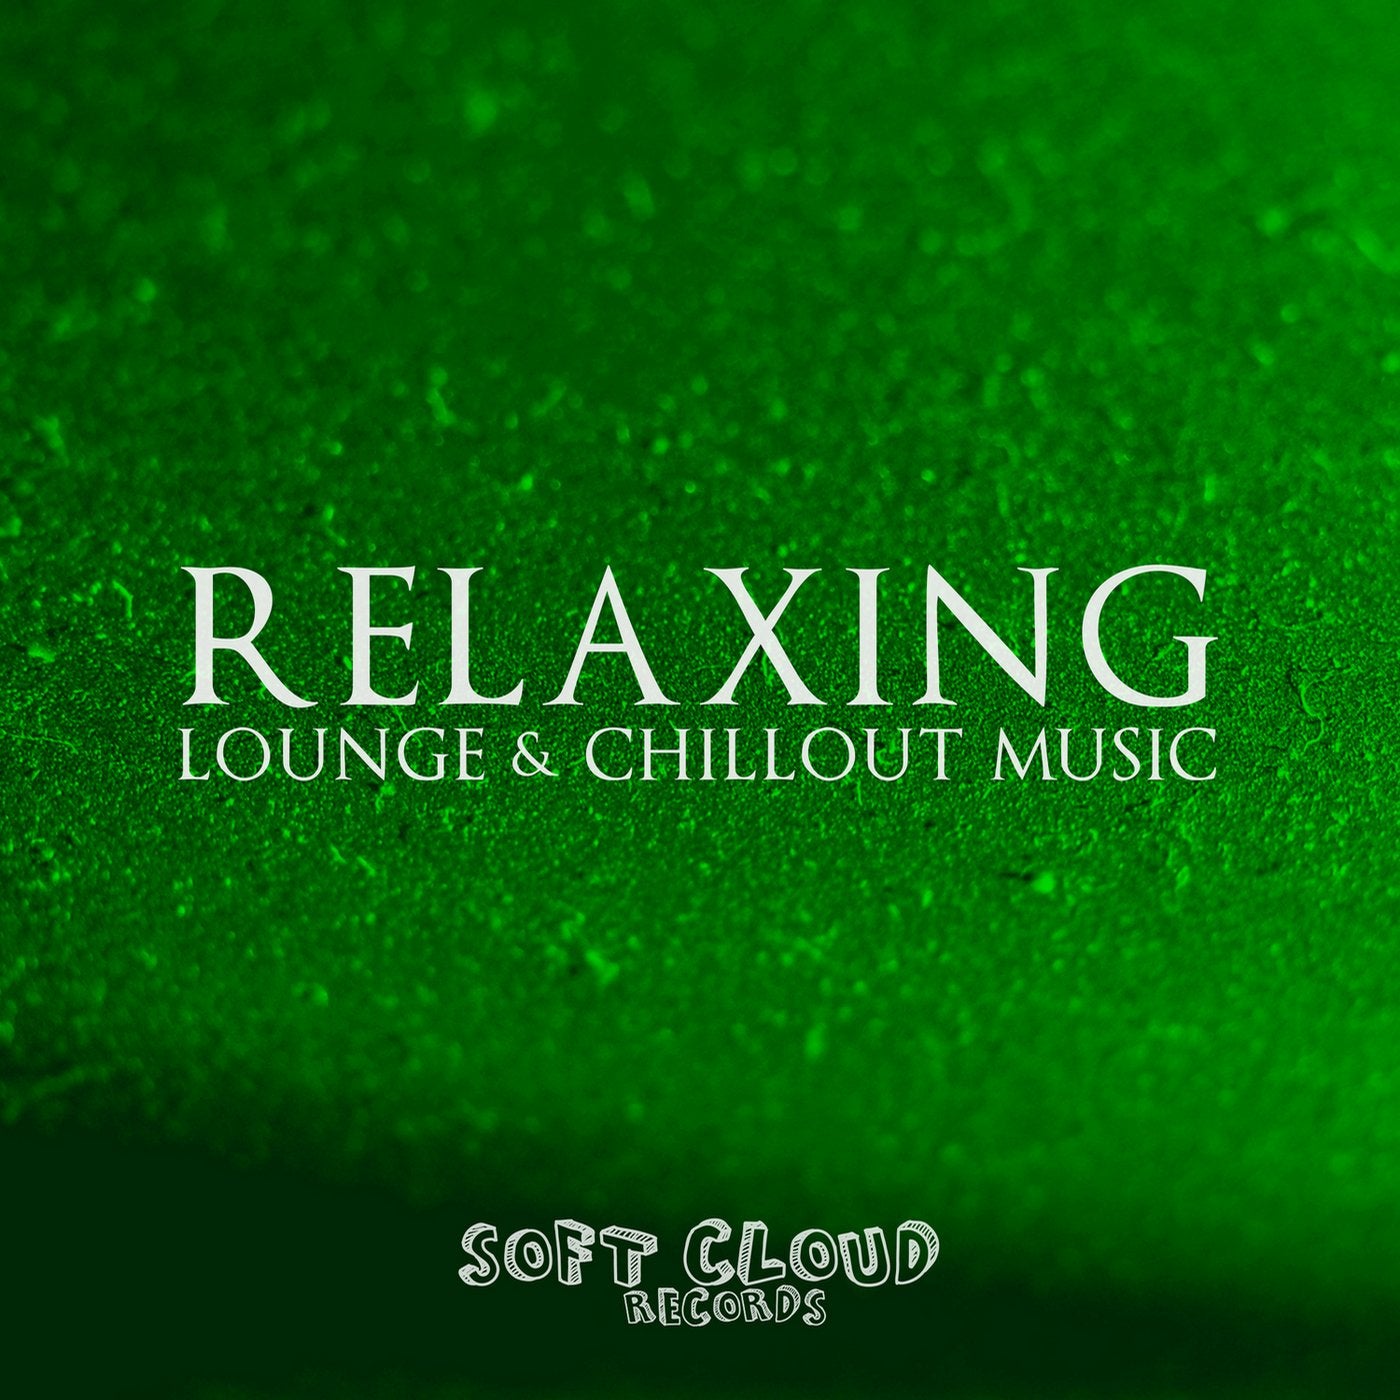 Relaxing Lounge & Chillout Music